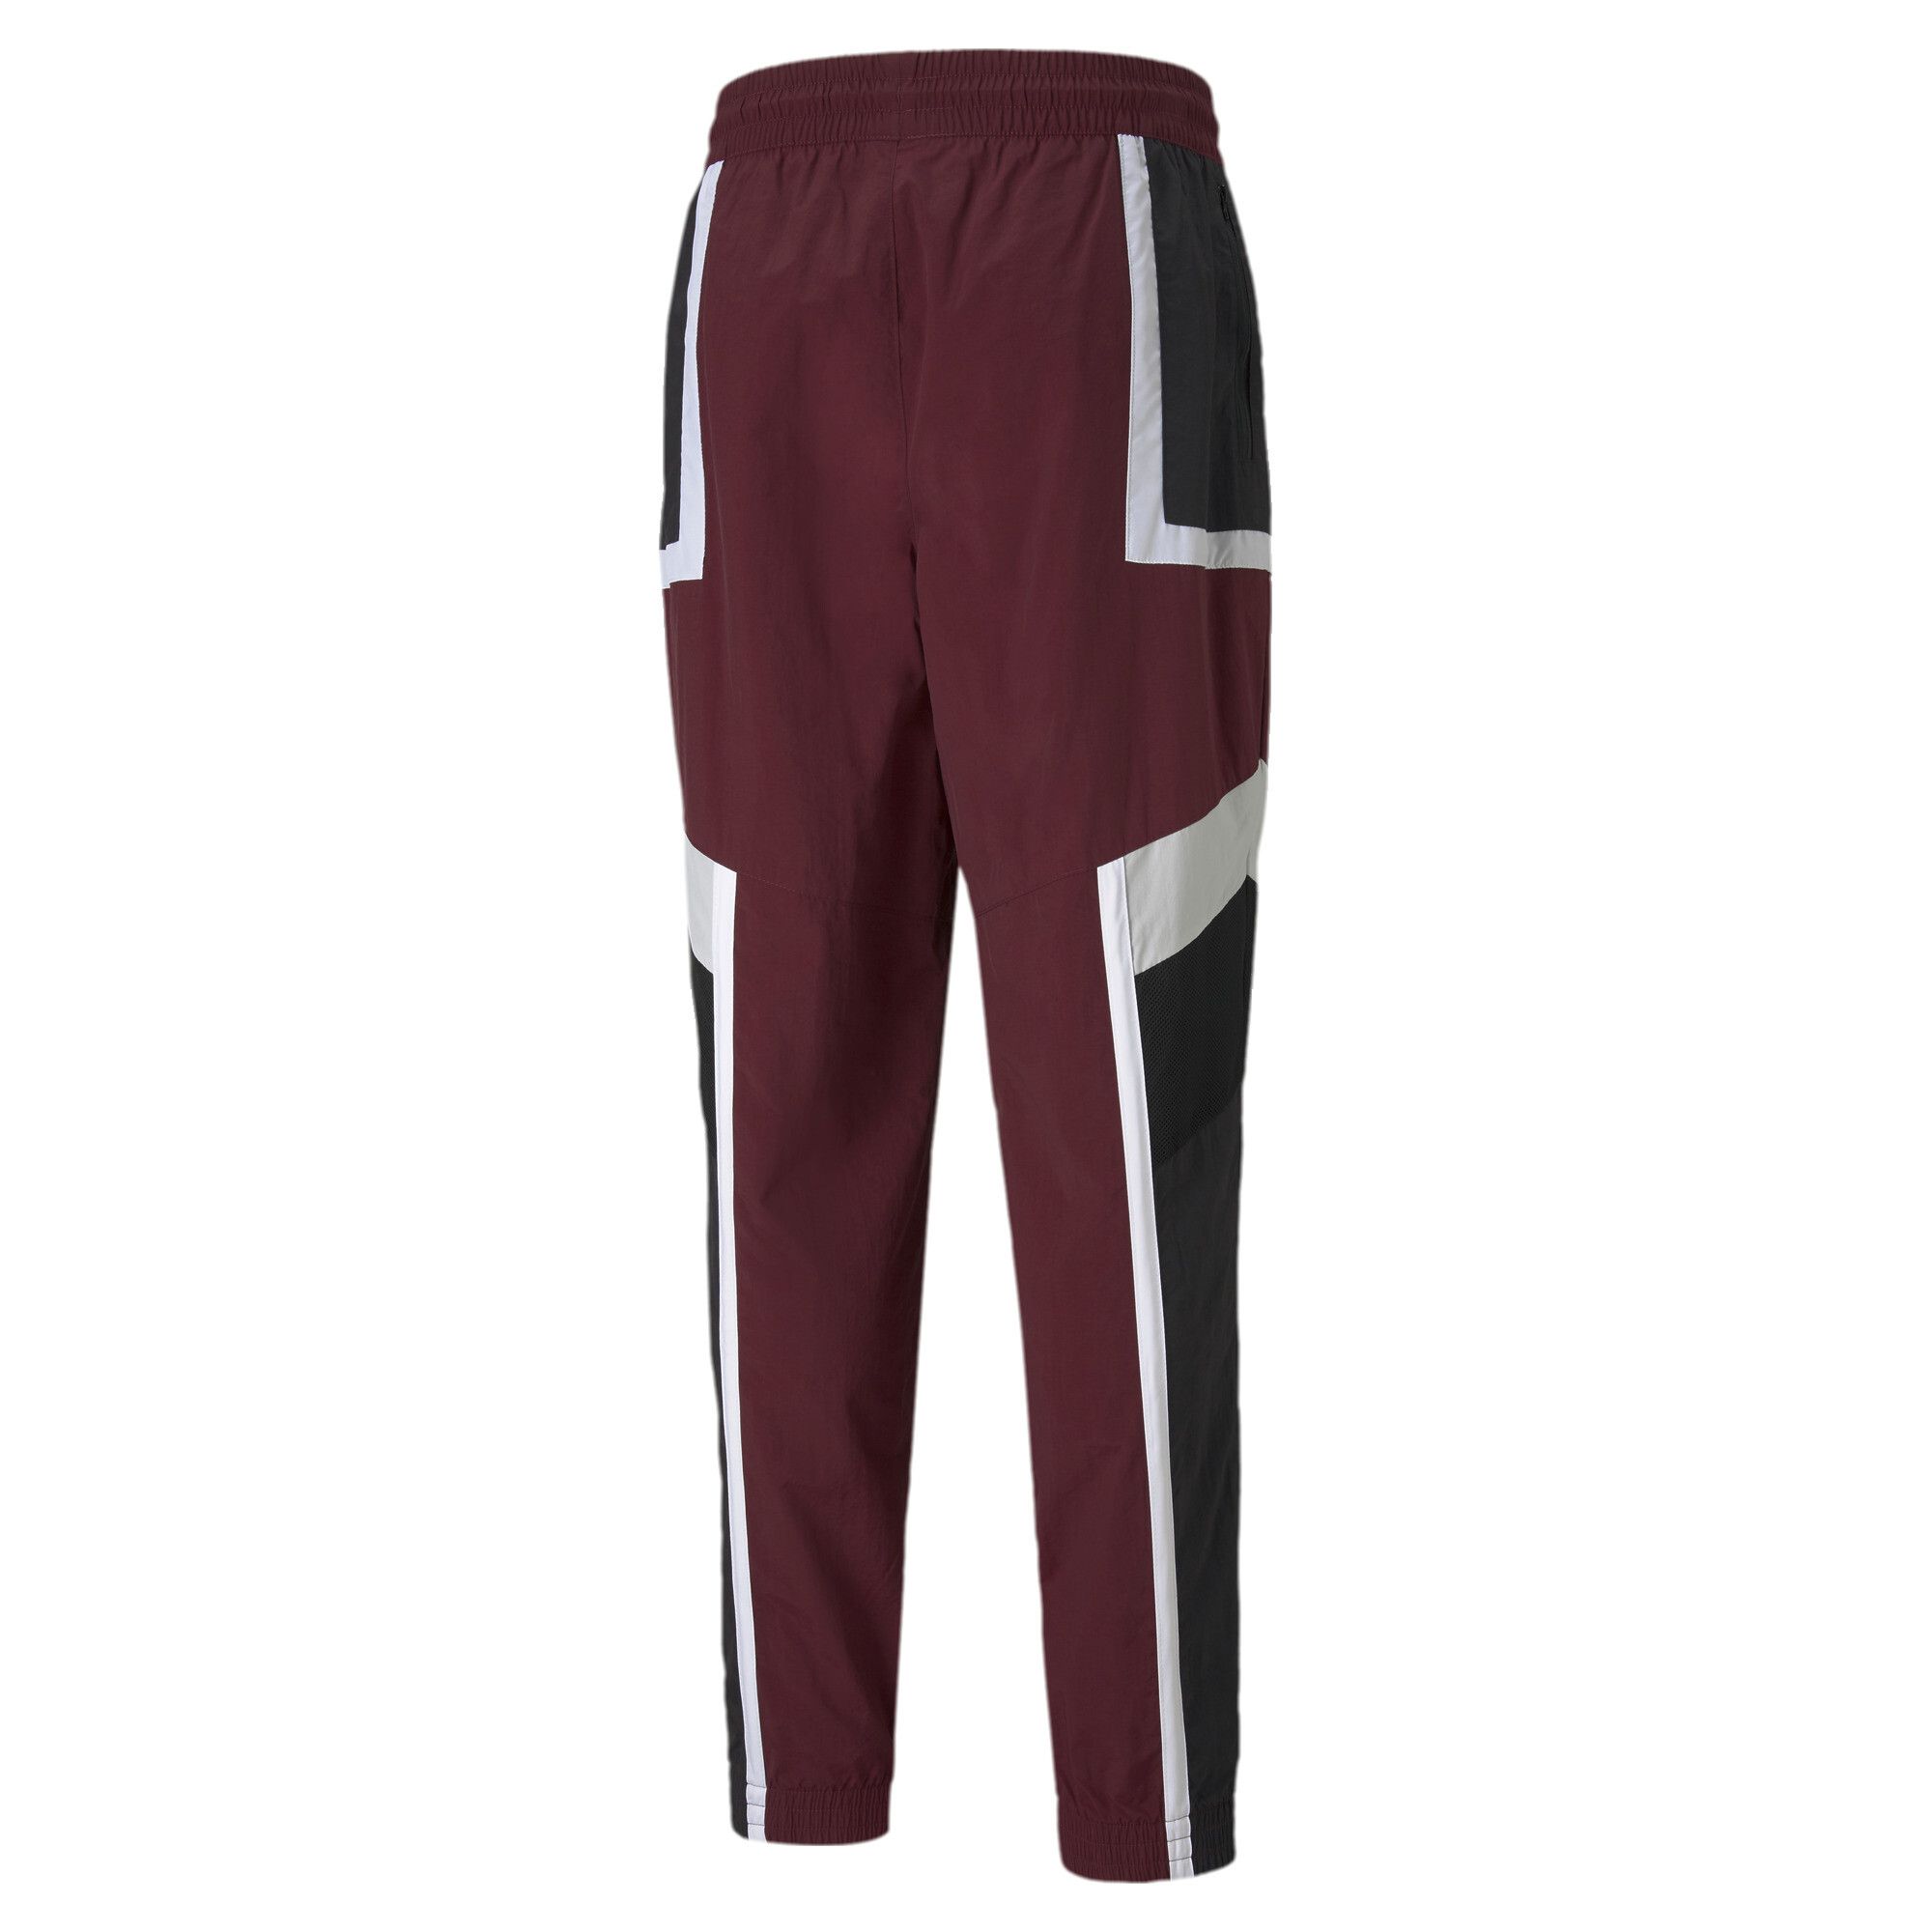 PRODUCT STORY Retro-inspired and street sleek, the Court Side Basketball Pants are head-turners. With lounge-worthy lines and in standout colour combinations, you'll make comfortable look cool. DETAILS : Regular fit Side pockets, plus hidden pockets for secure storage of belongings Elasticated cuffs Adjustable waistband with elongated drawcords for customised comfort PUMA branding at left thigh